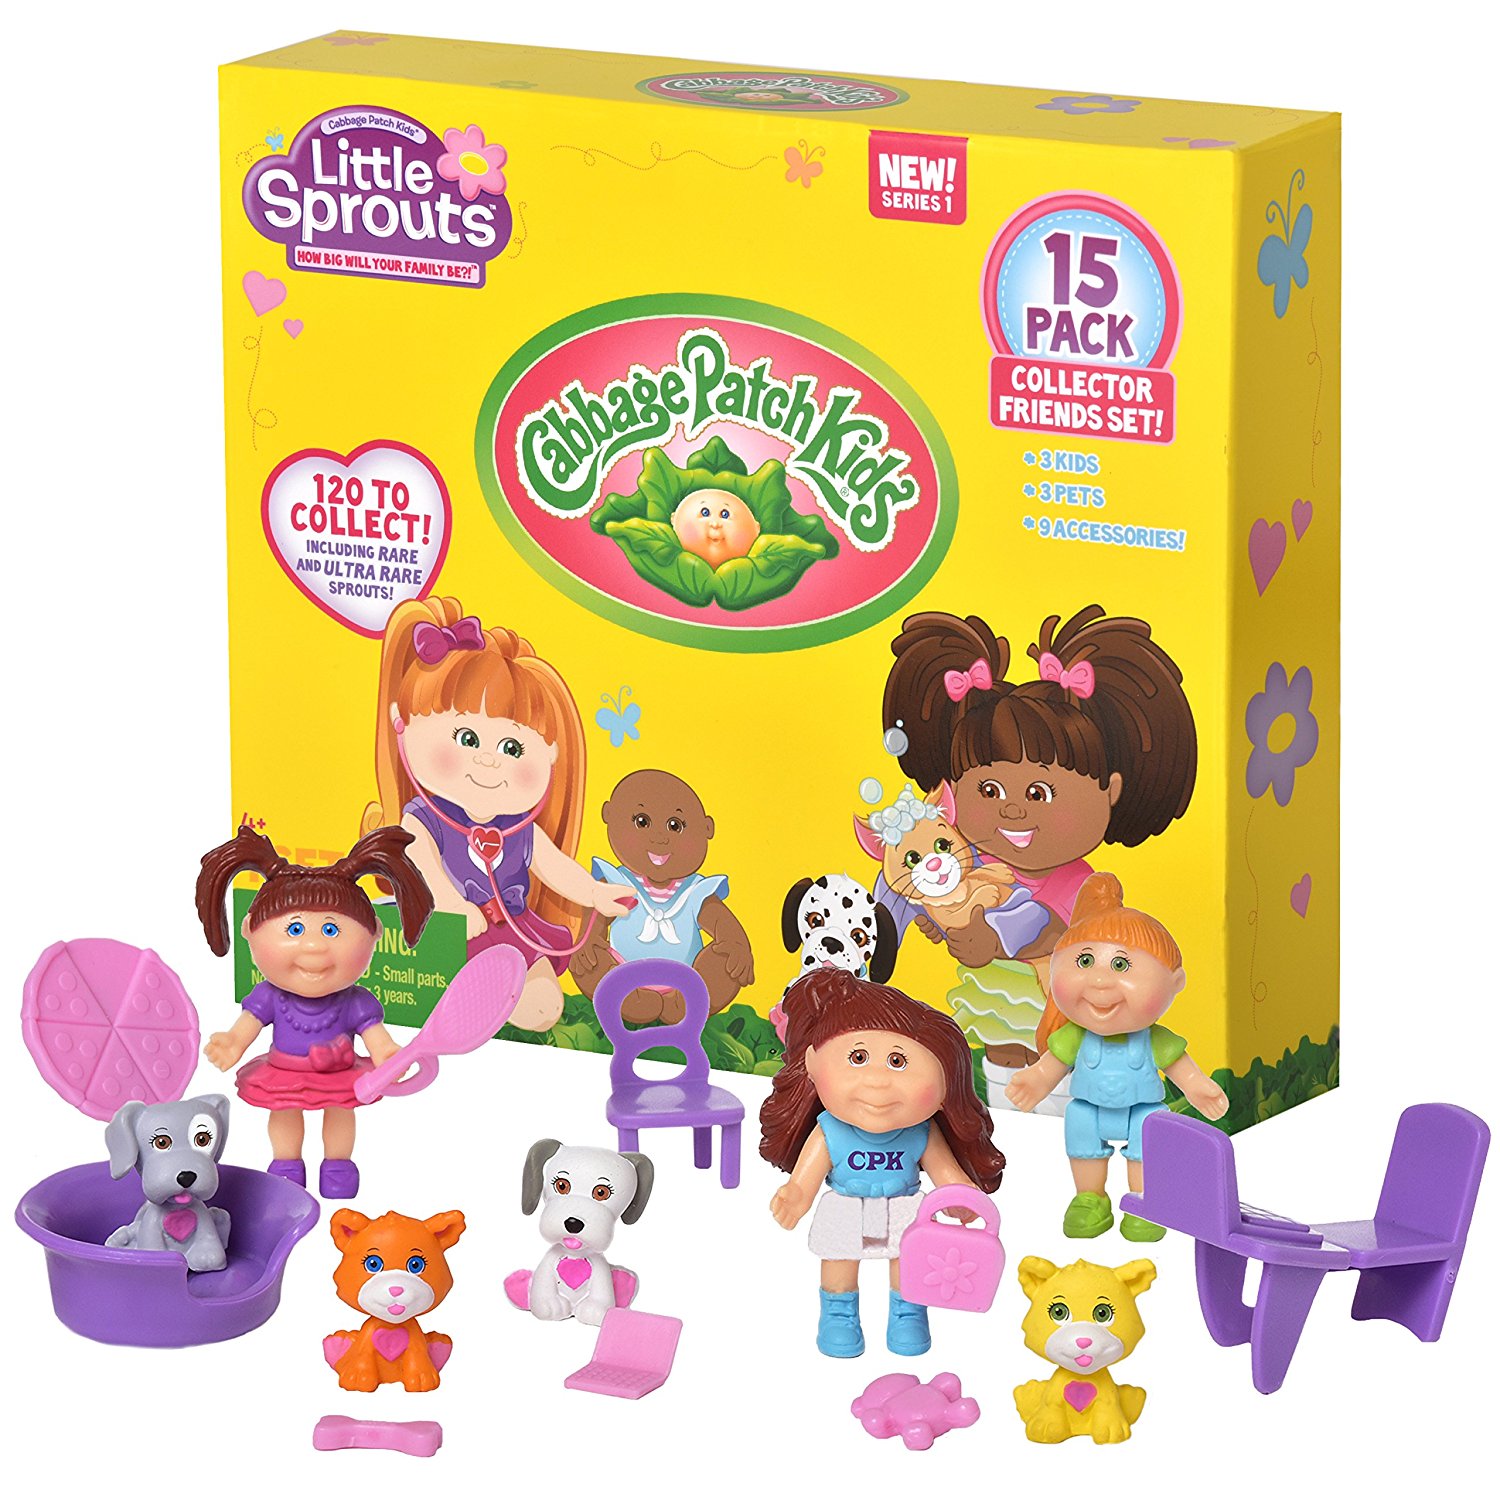 Cabbage Patch Kids Little Sprouts Collector Friends 15 Pack Only $8.49! (Reg $19.99)